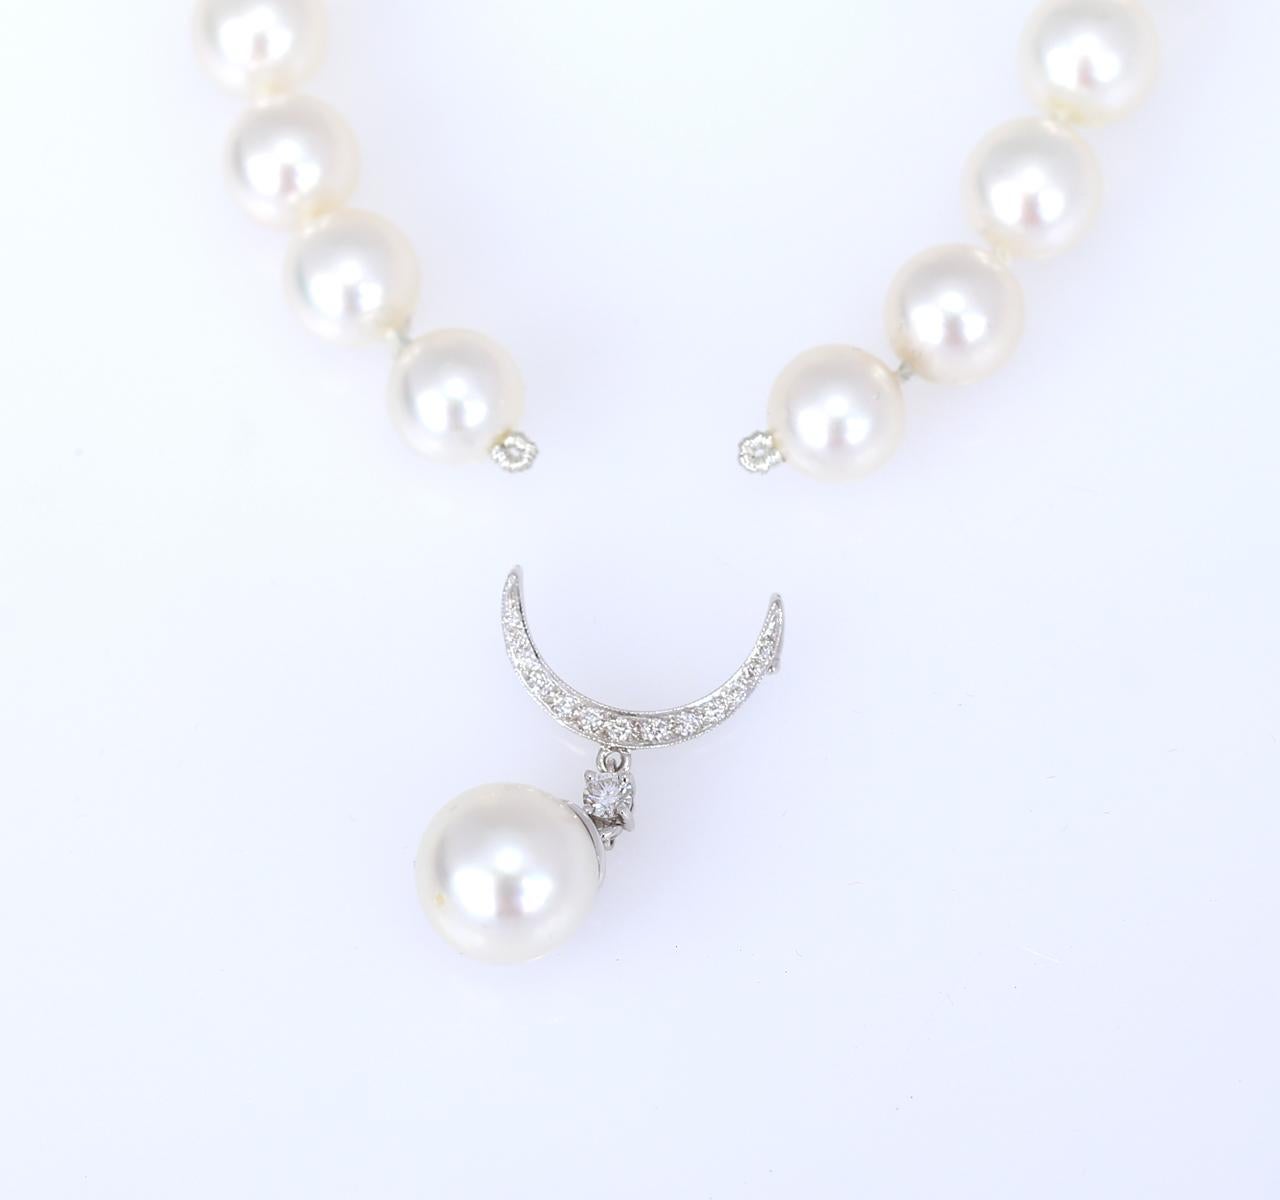 Pearls Diamonds 2.5 Carat Necklace AAA Quality, 2020 For Sale 7